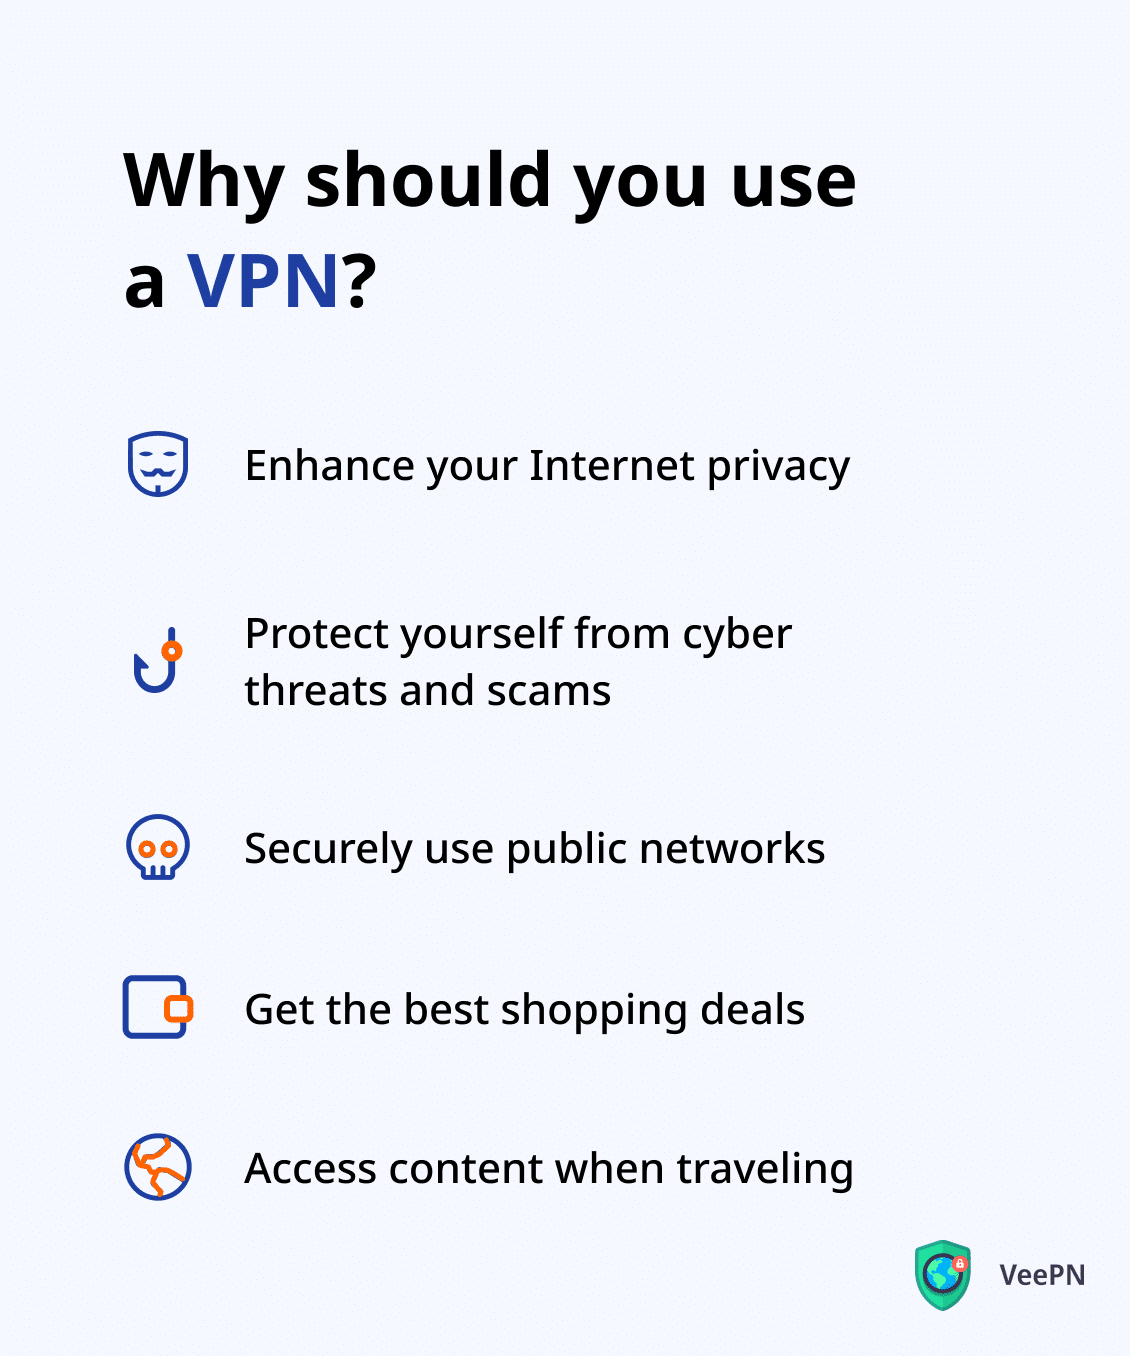 Why should you use a VPN?